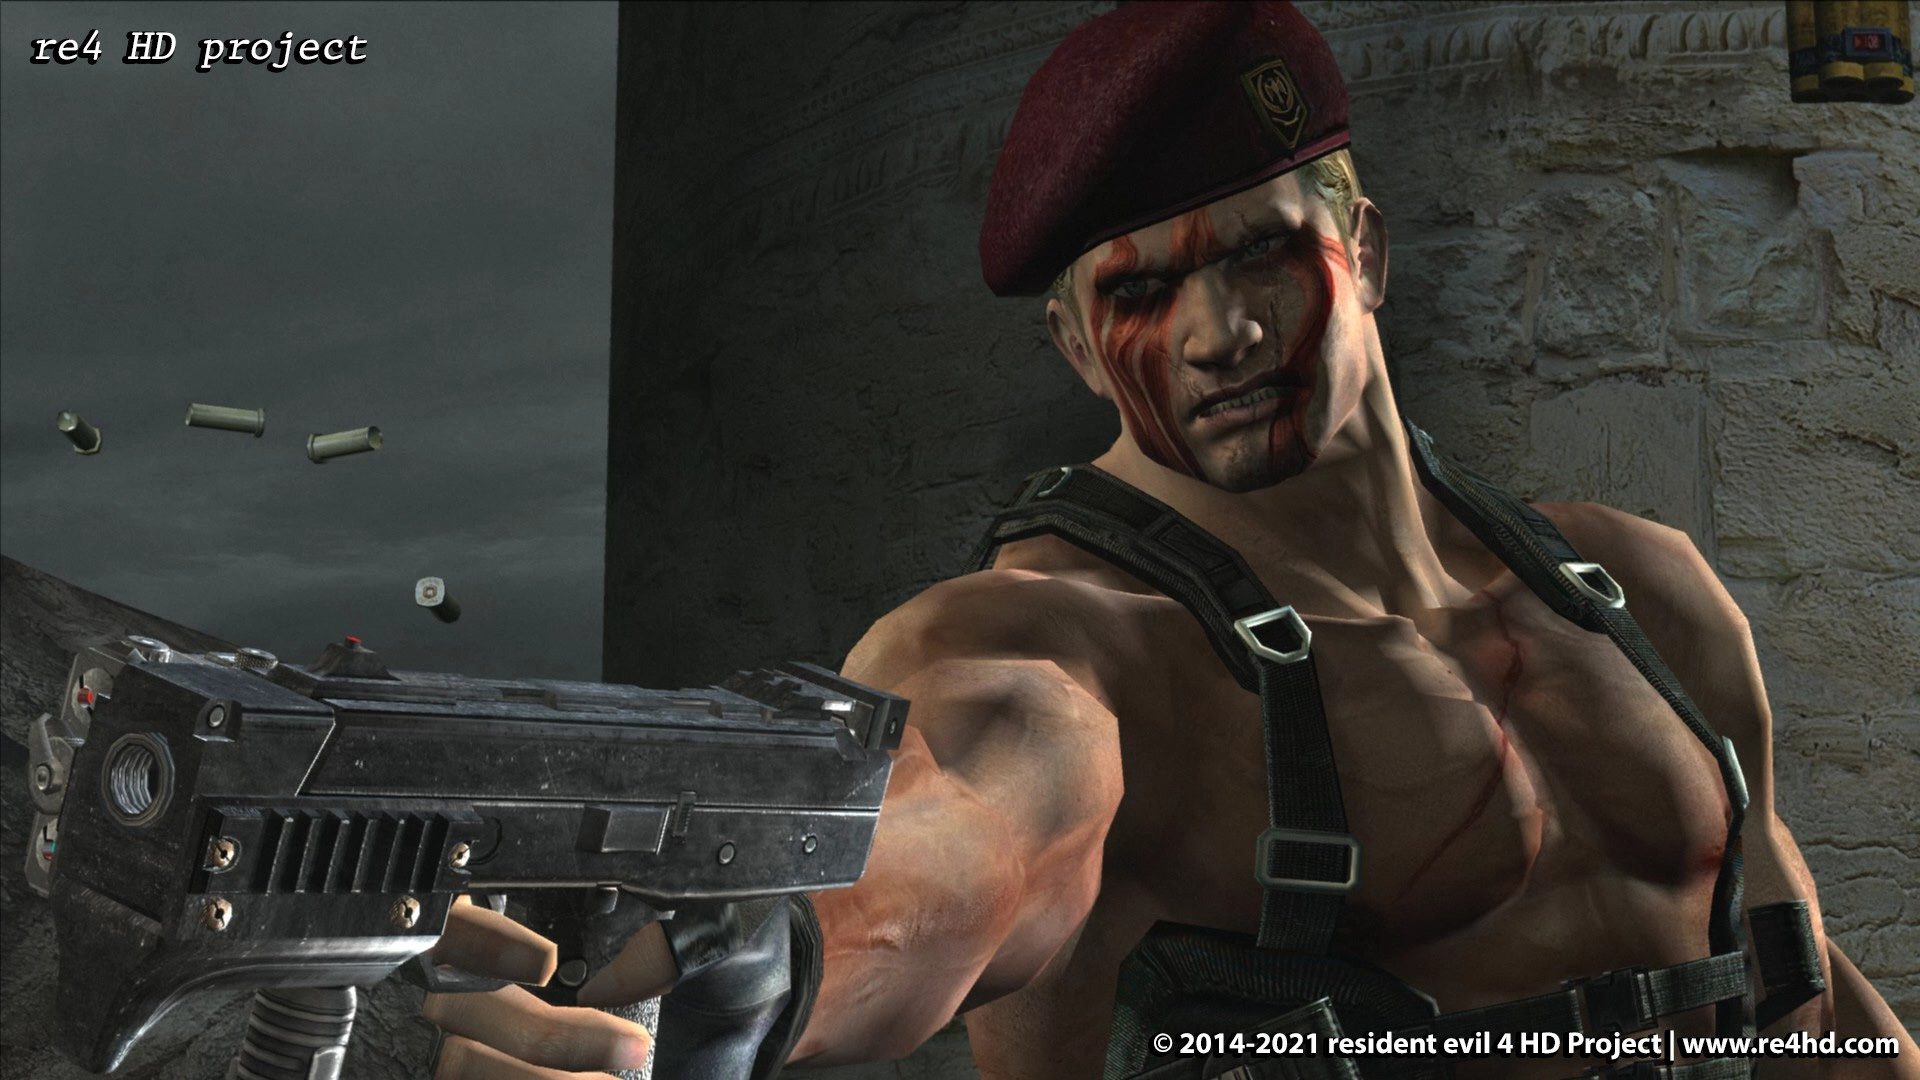 The amazing Resident Evil 4 HD makeover mod launches in February